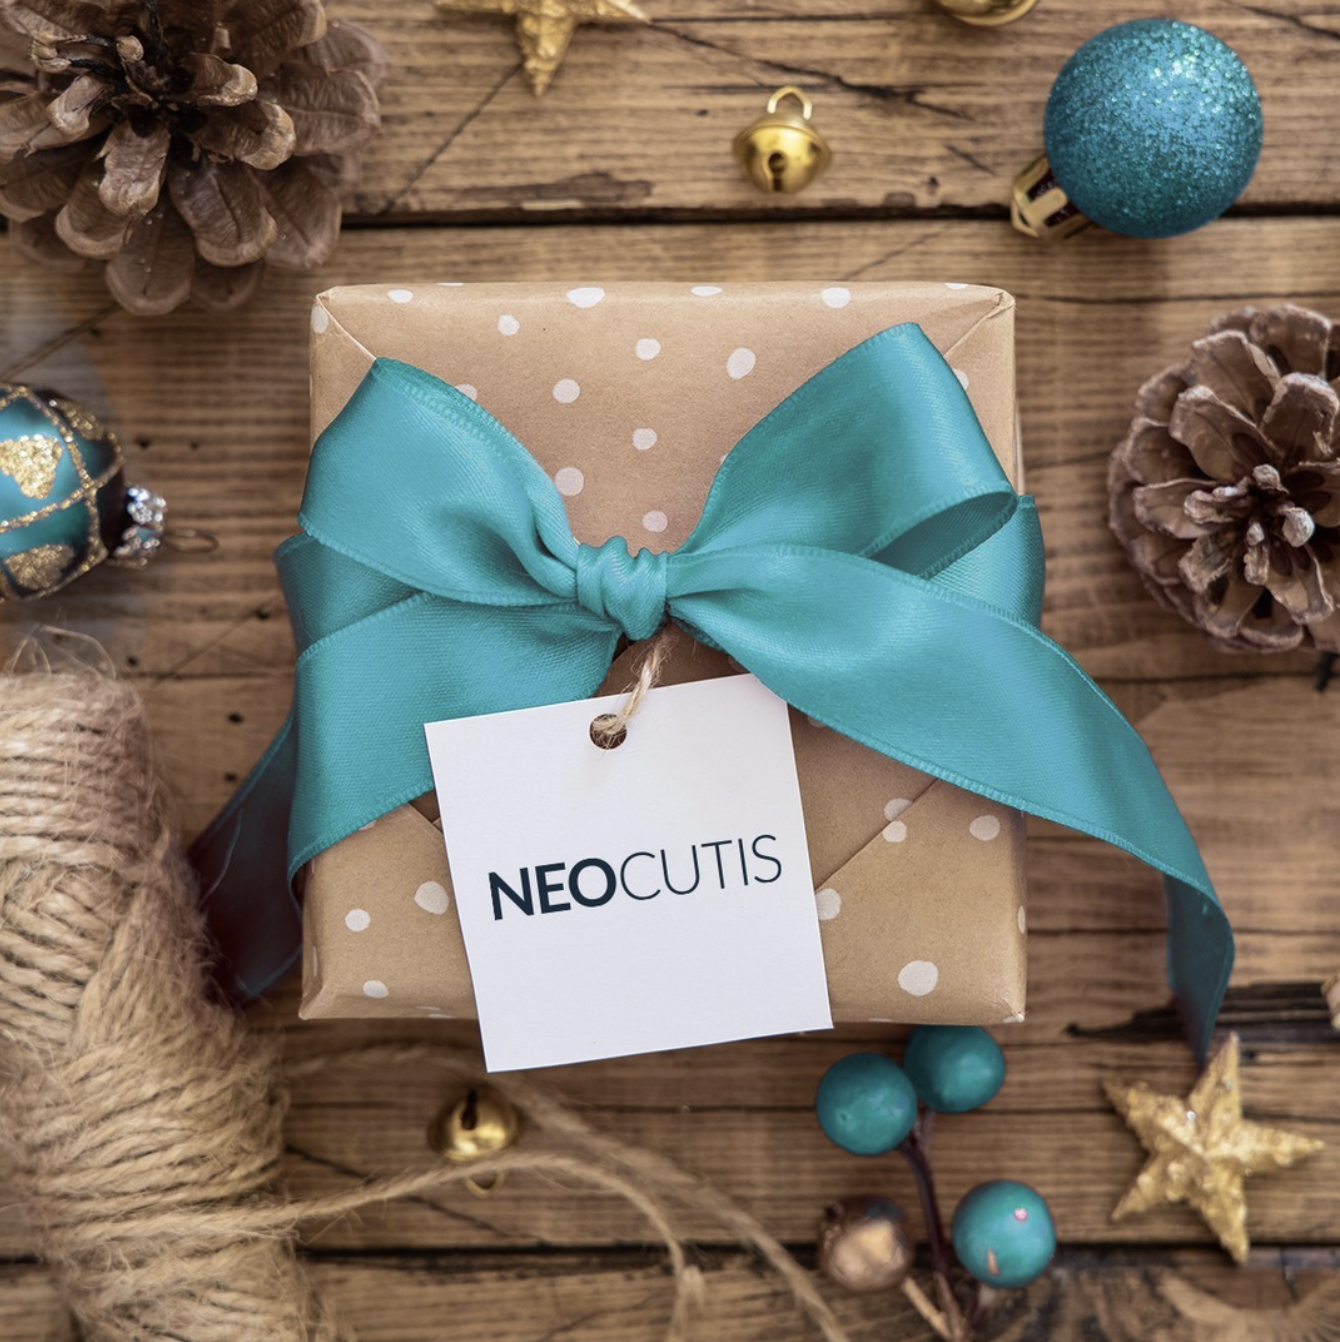 SkinStore Coupon: Get 30% Off On Neocutis Products